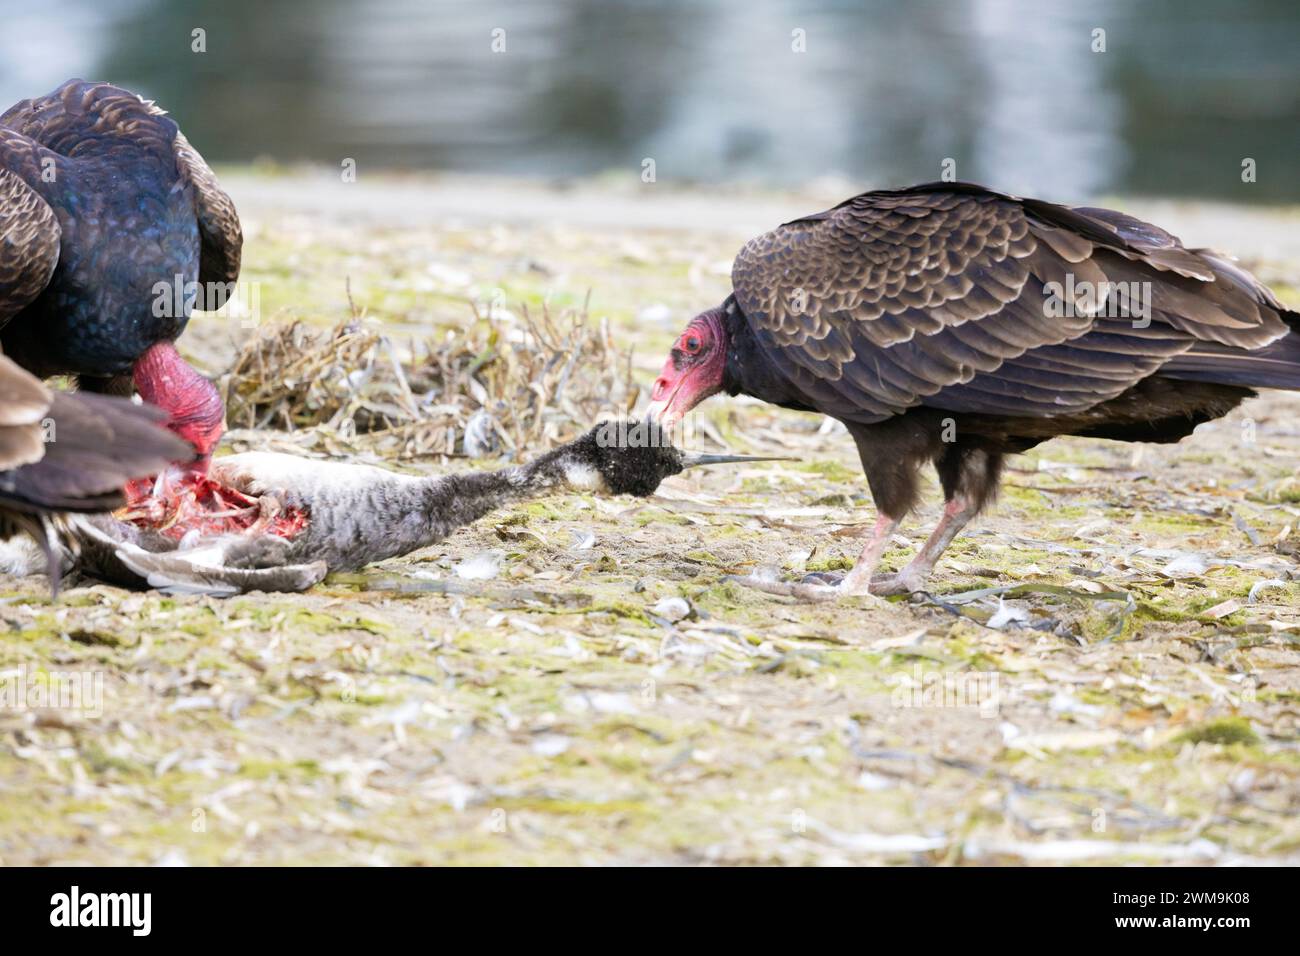 Turkey Vultures Eating Dead Western Grebe Stock Photo